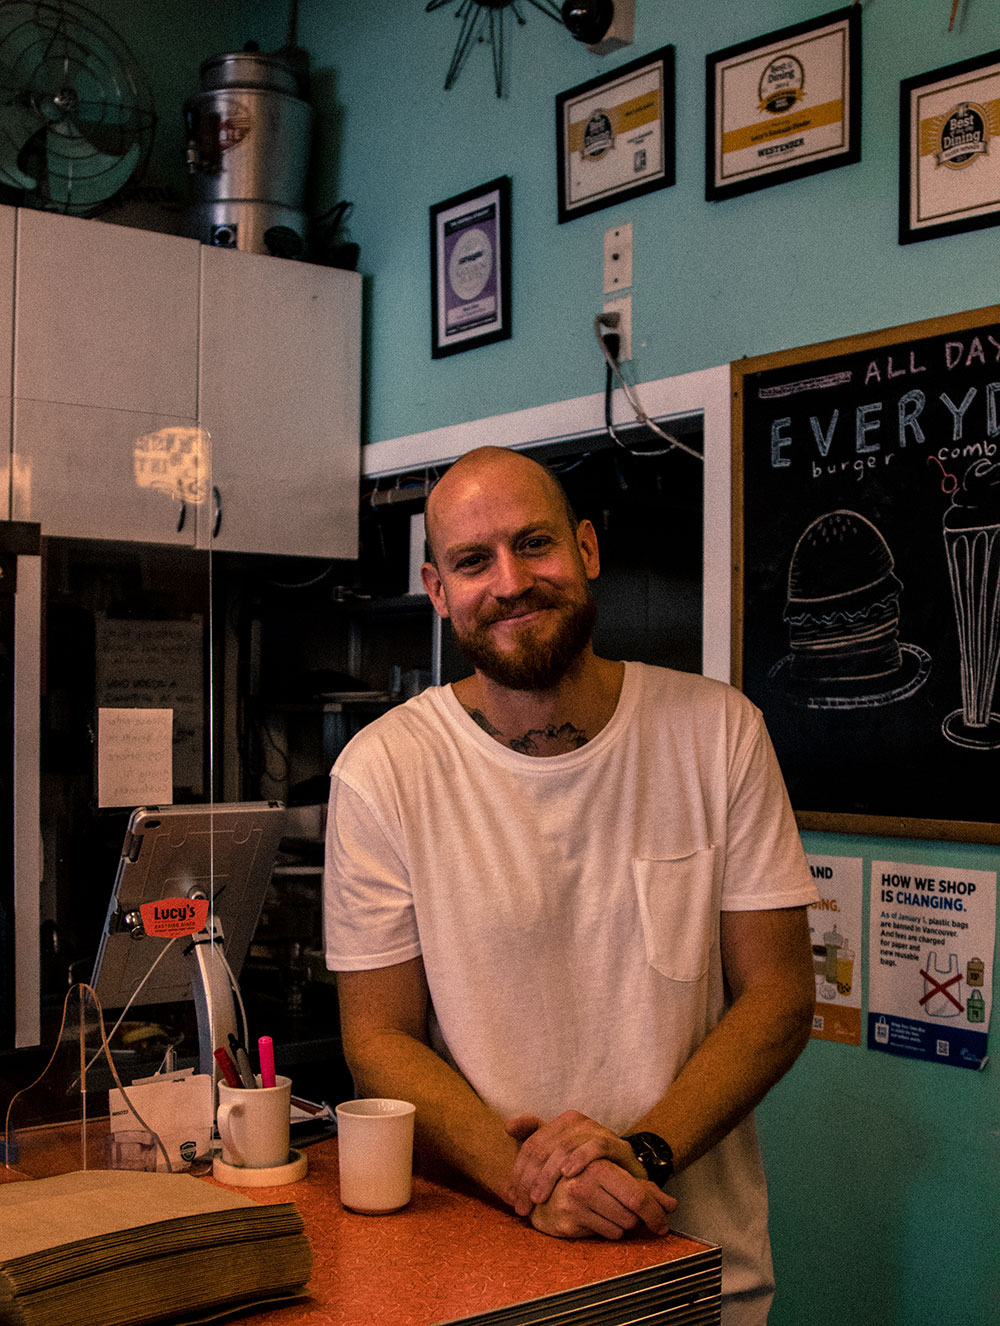 A man wearing a white T-shirt, from the collar of which peeks a neck tattoo, leans against the counter and smiles at the camera. 